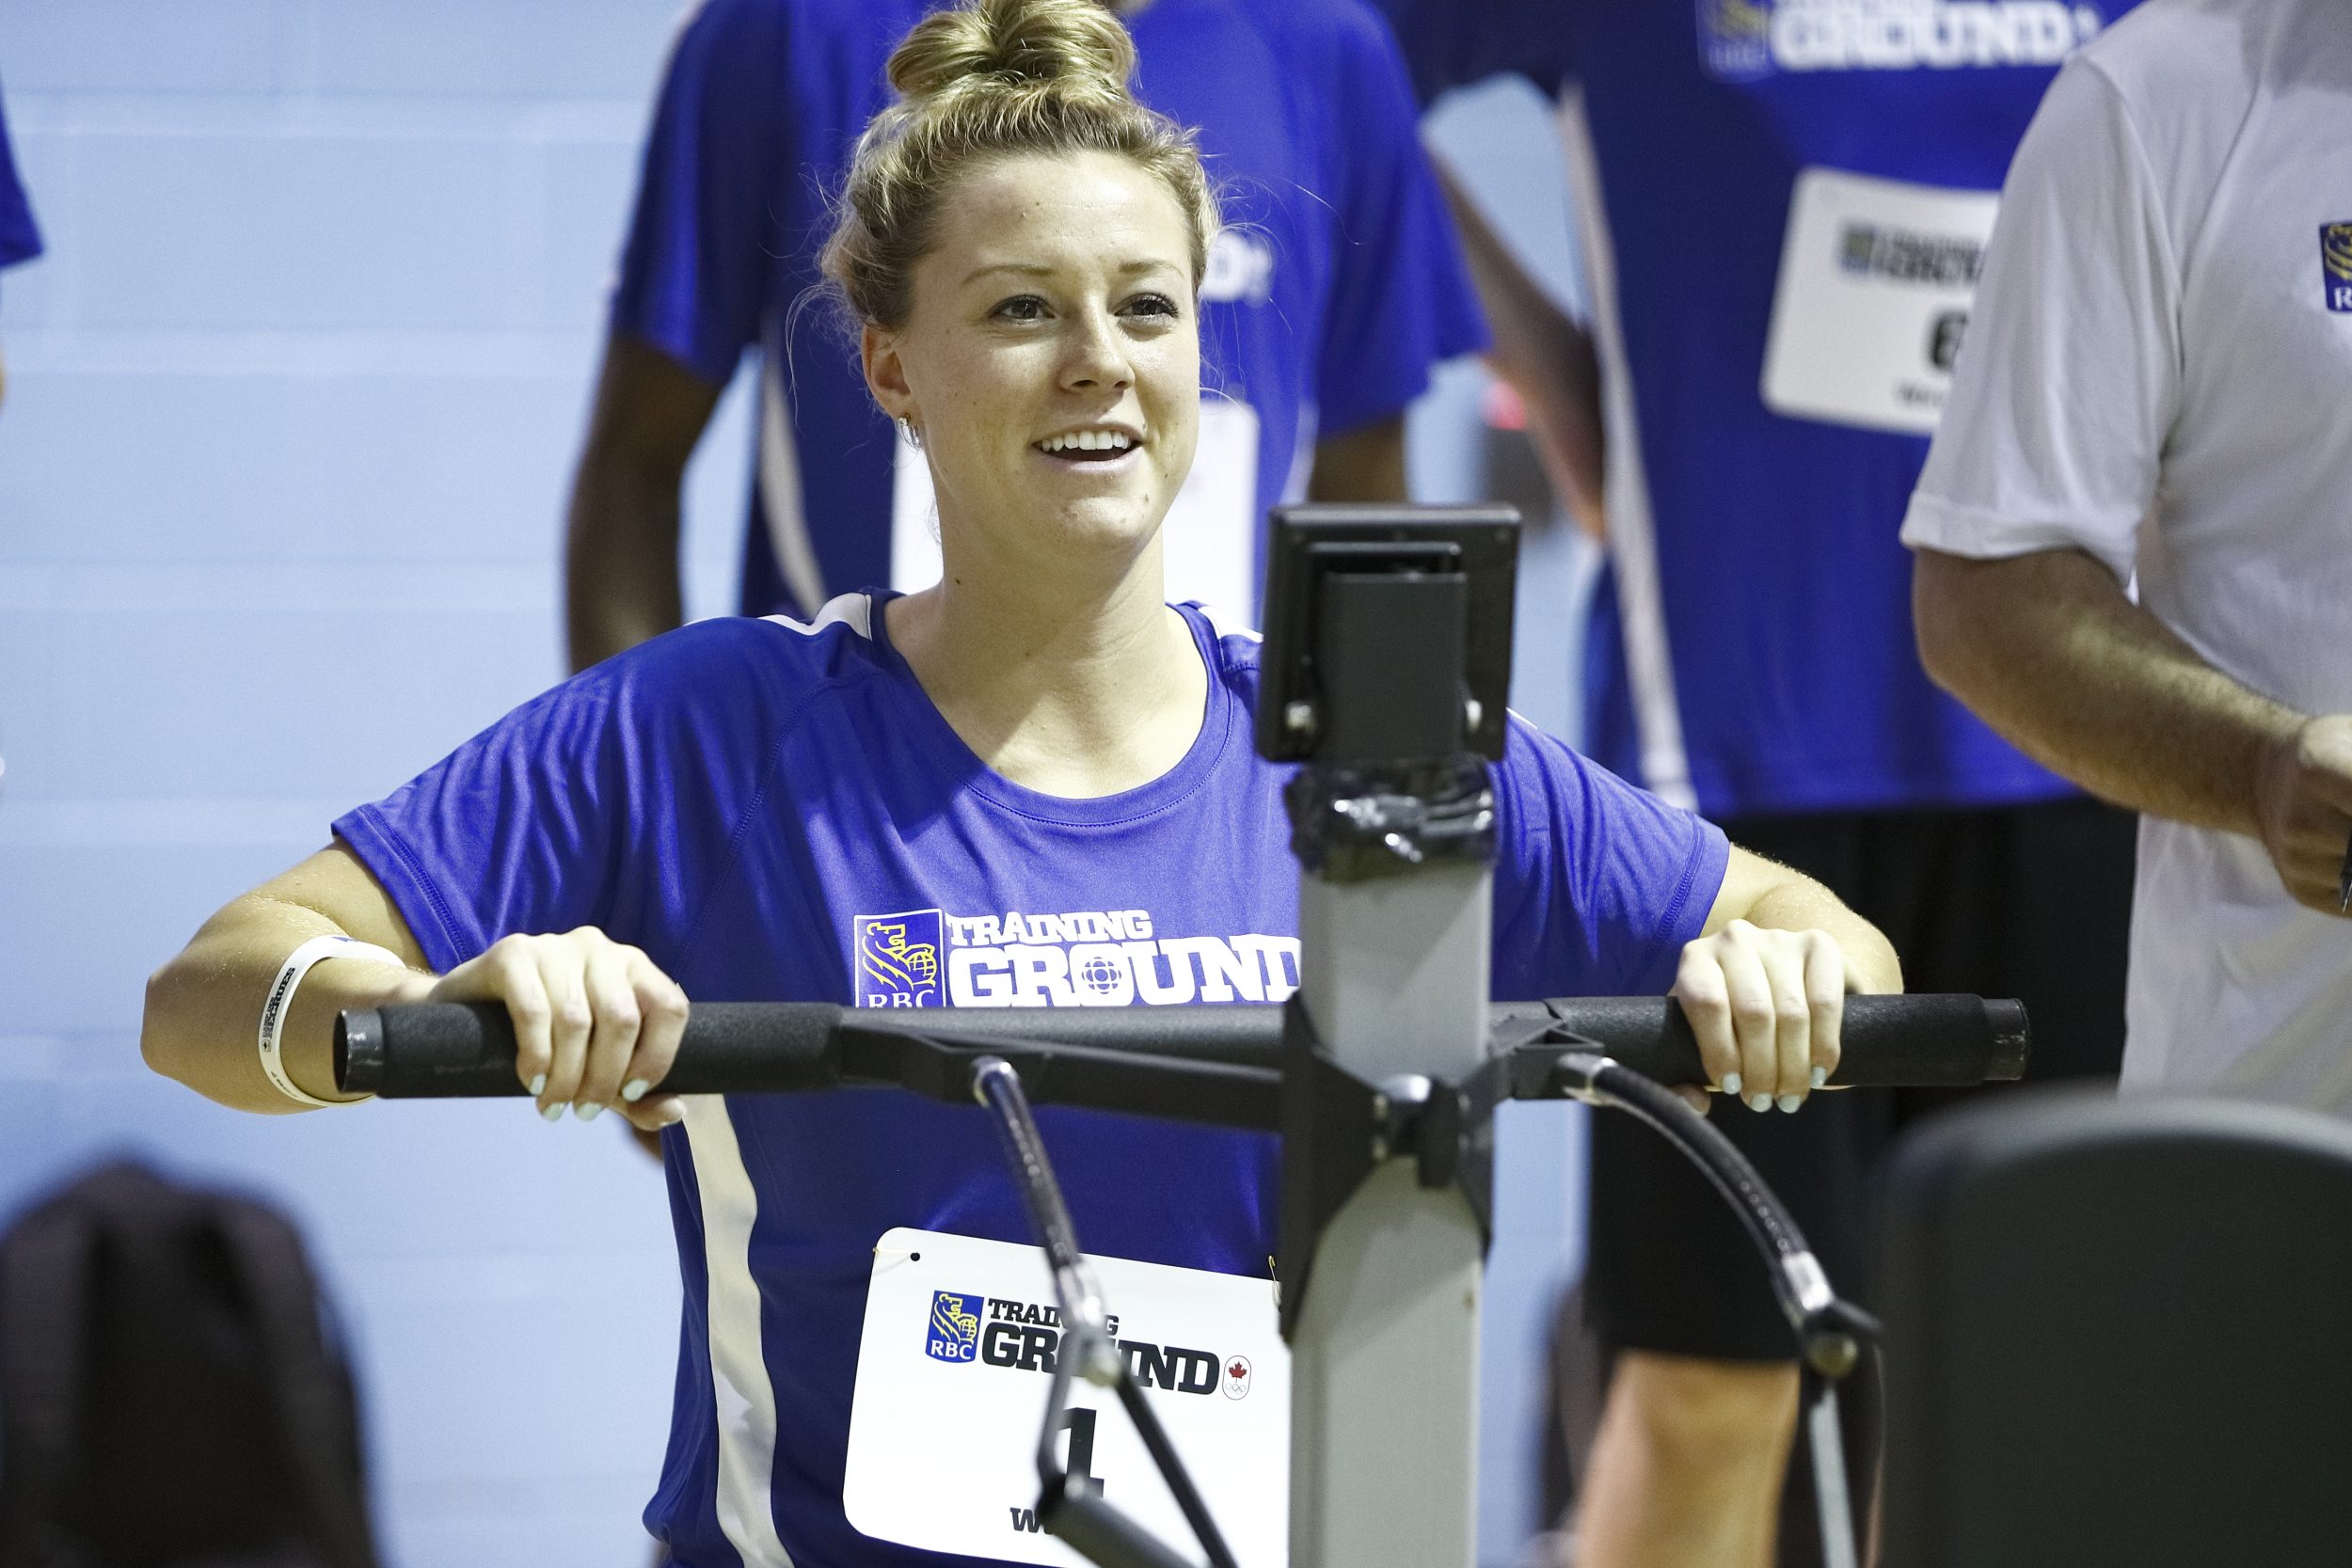 Kelsey Mitchell on the rowing machine at RBC Training Ground